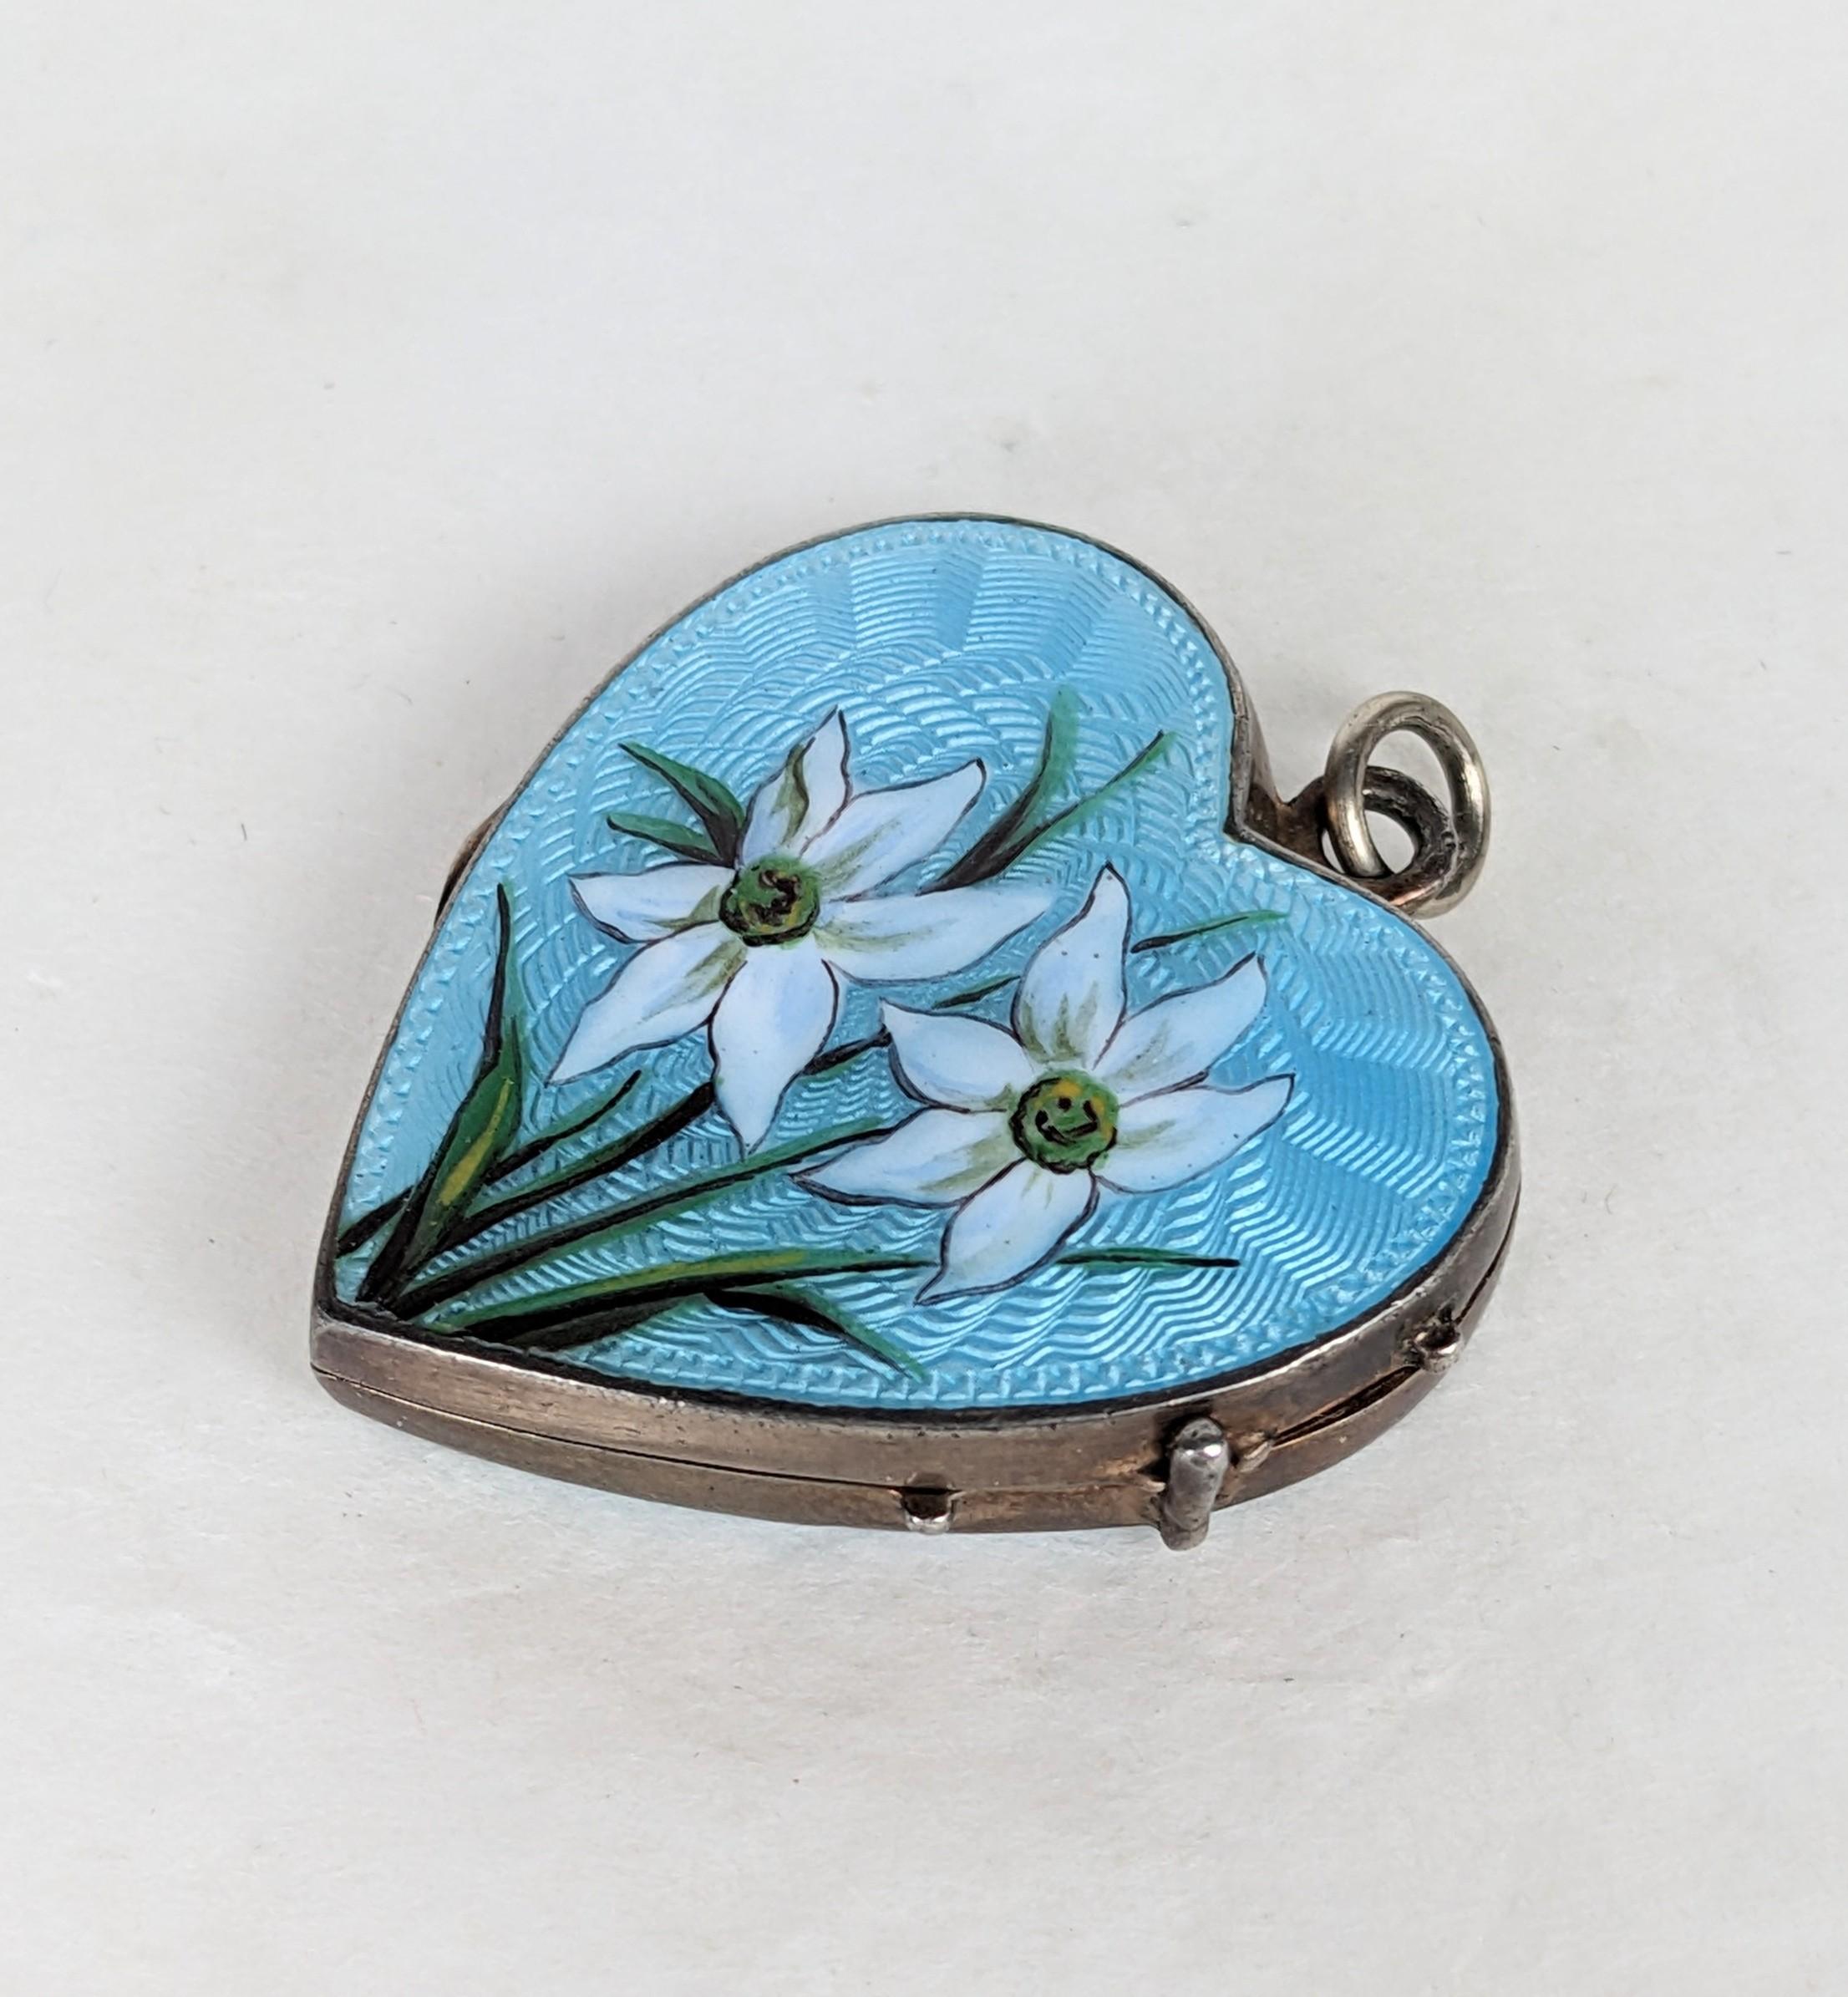 Antique Silver and Enamel Edelweiss Locket In Excellent Condition For Sale In New York, NY